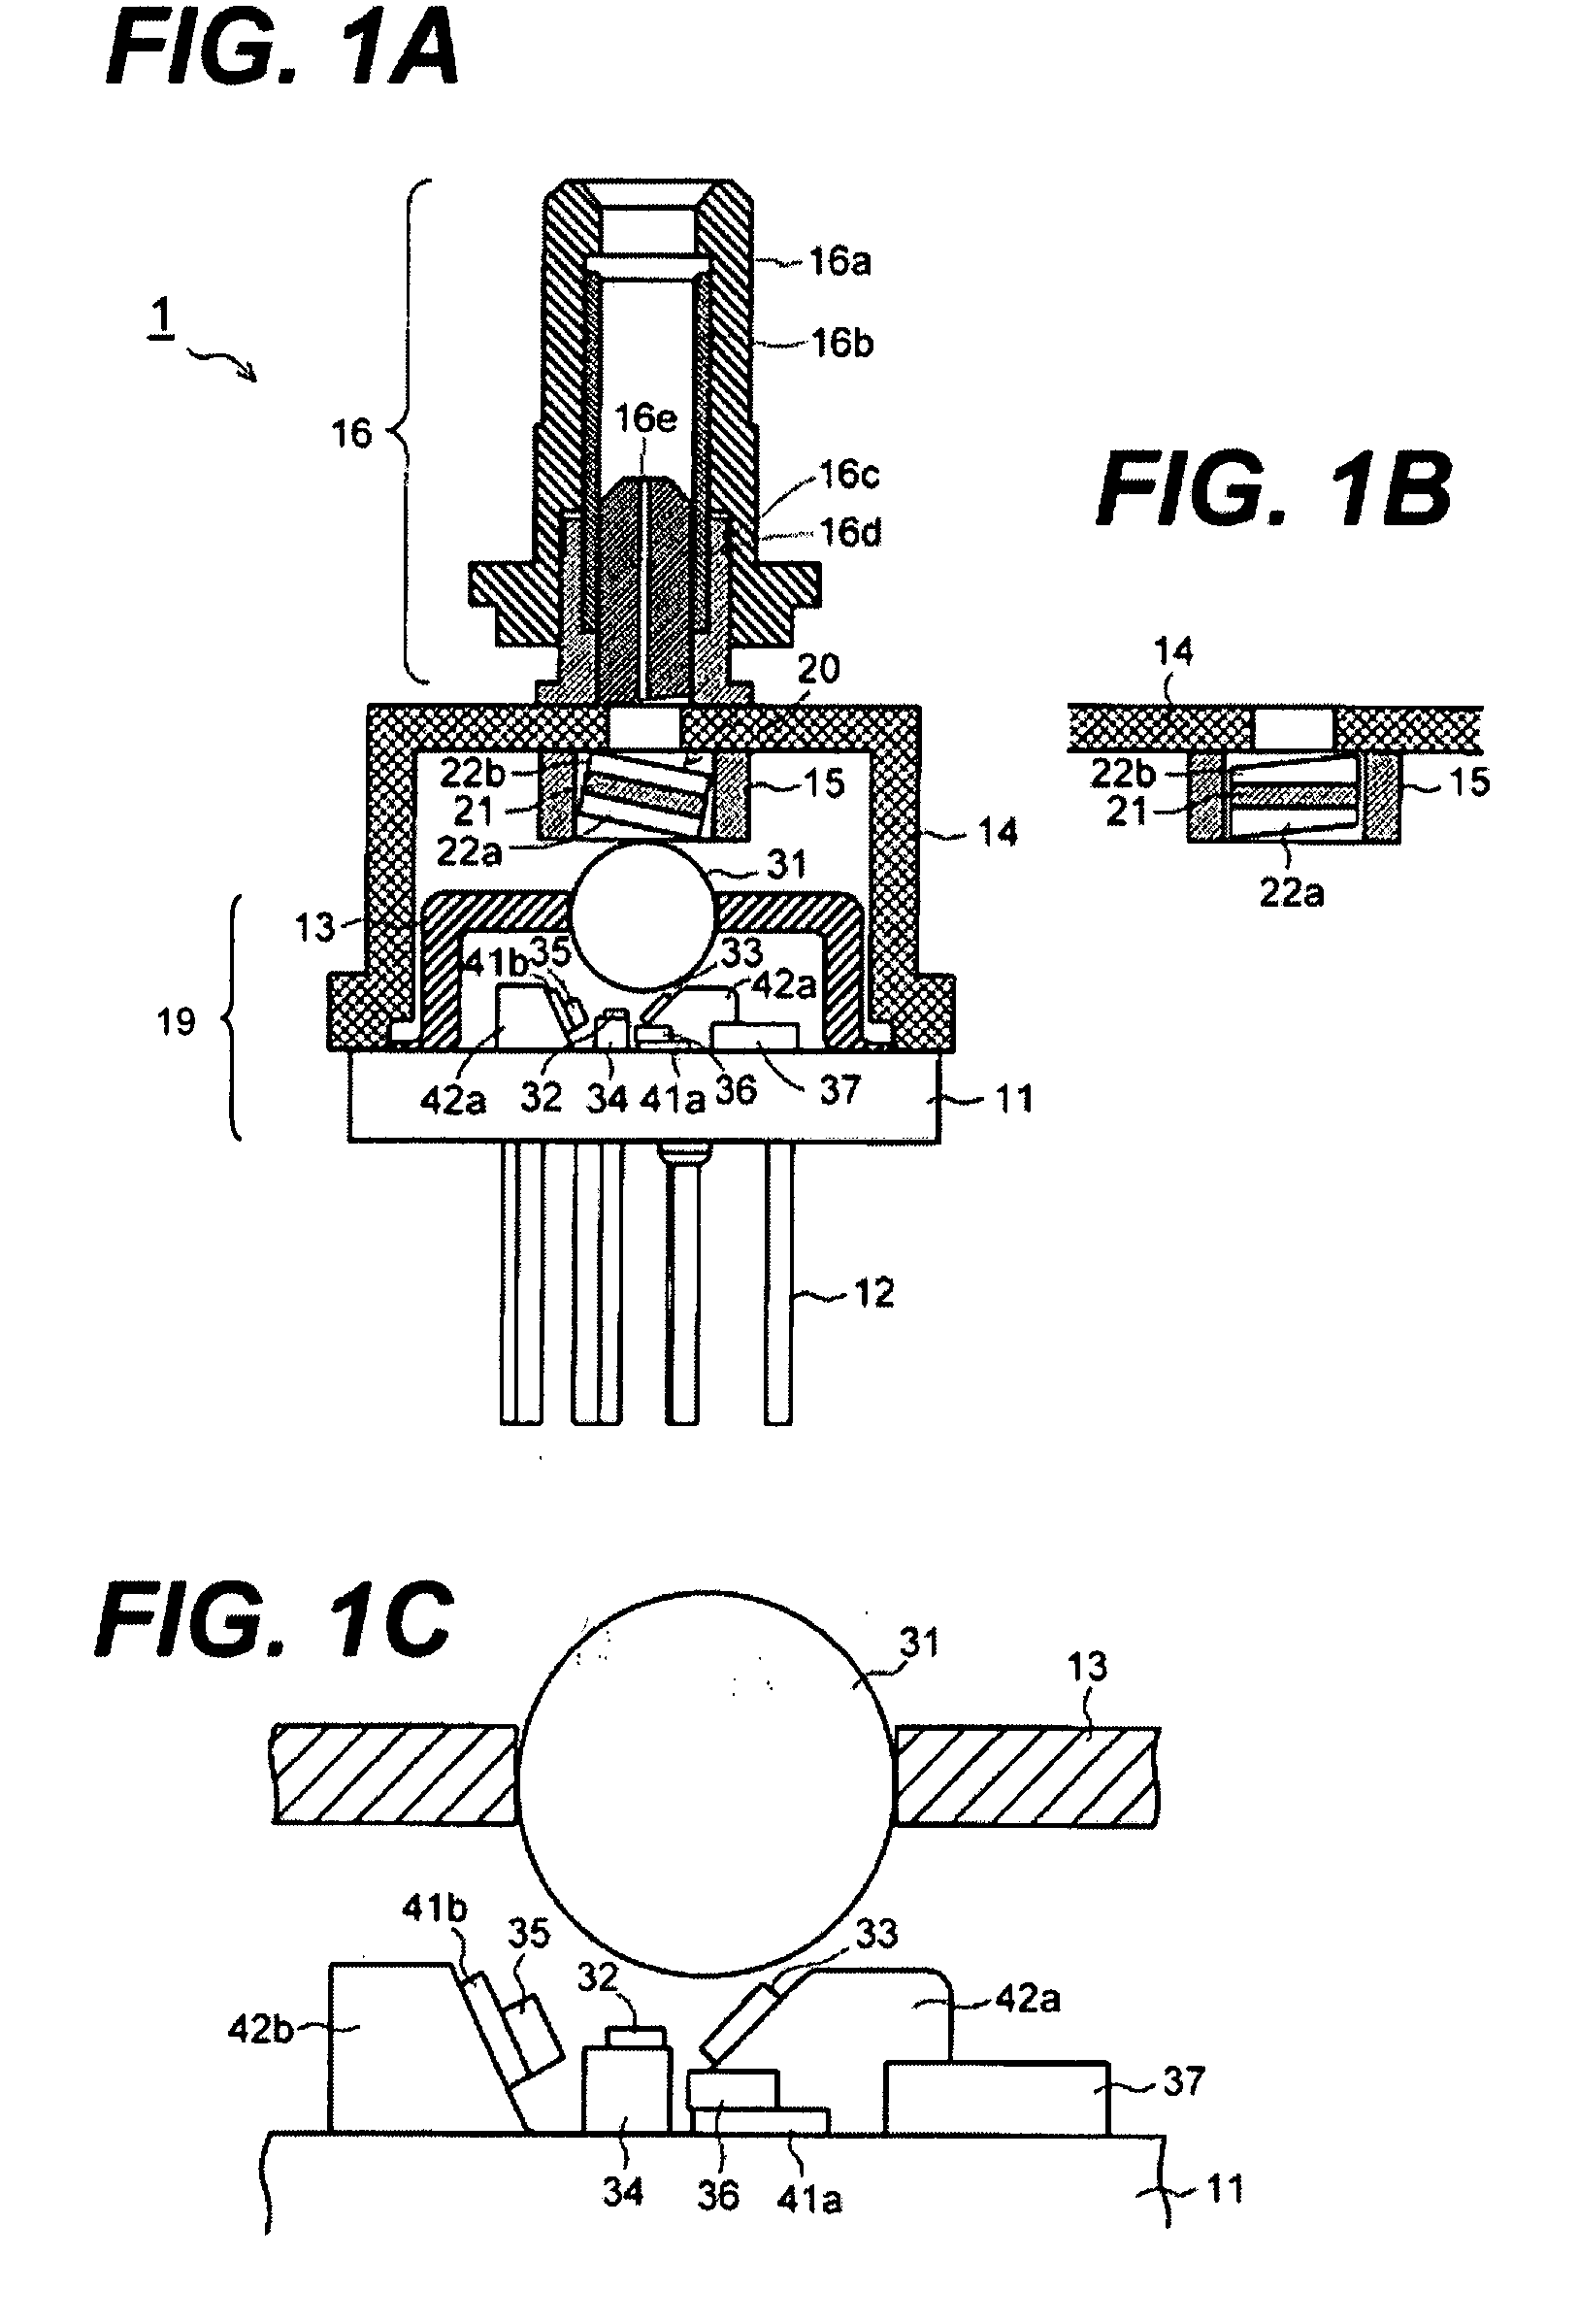 Bi-directional optical module with a polarization independent optical isolator